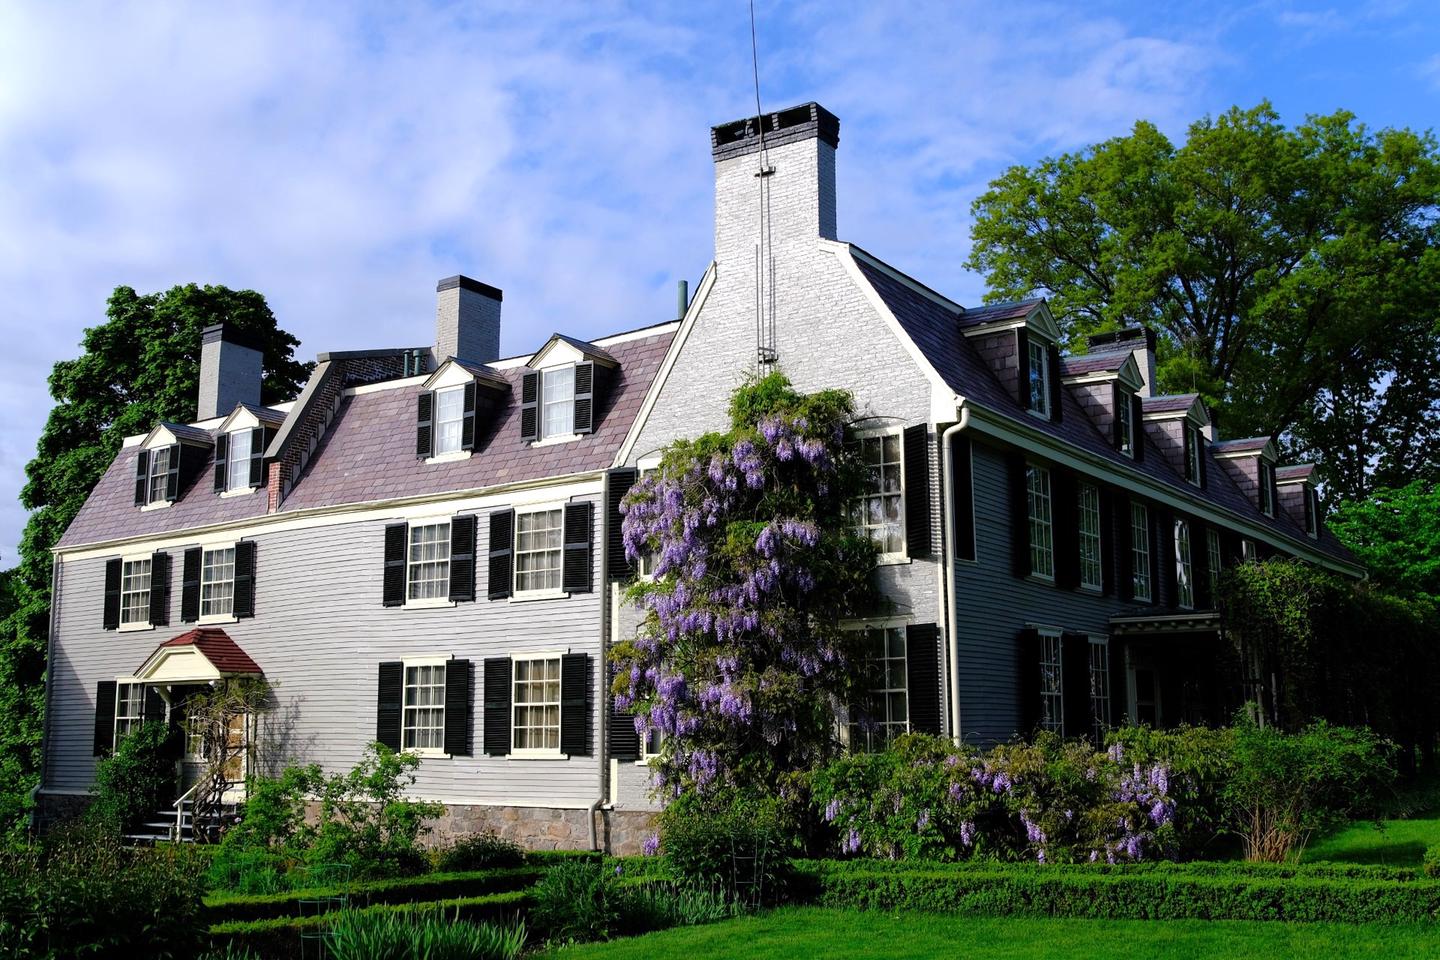 A large building with light gray siding, multiple windows with white trim and black shutters, and 3 chimneys. Blooming purple wisteria flowers grow on a vine up the side of the building. building covered with green vines and next to it a large home with gray siding, white trim, and black shutters. In the foreground is a garden with boxwoods.The Old House at Peace field is the third stop on the Extended Park Tour. The Old House at Peace field was home to four generations of the Adams family, starting with John and Abigail Adams who moved into the home in 1788. 